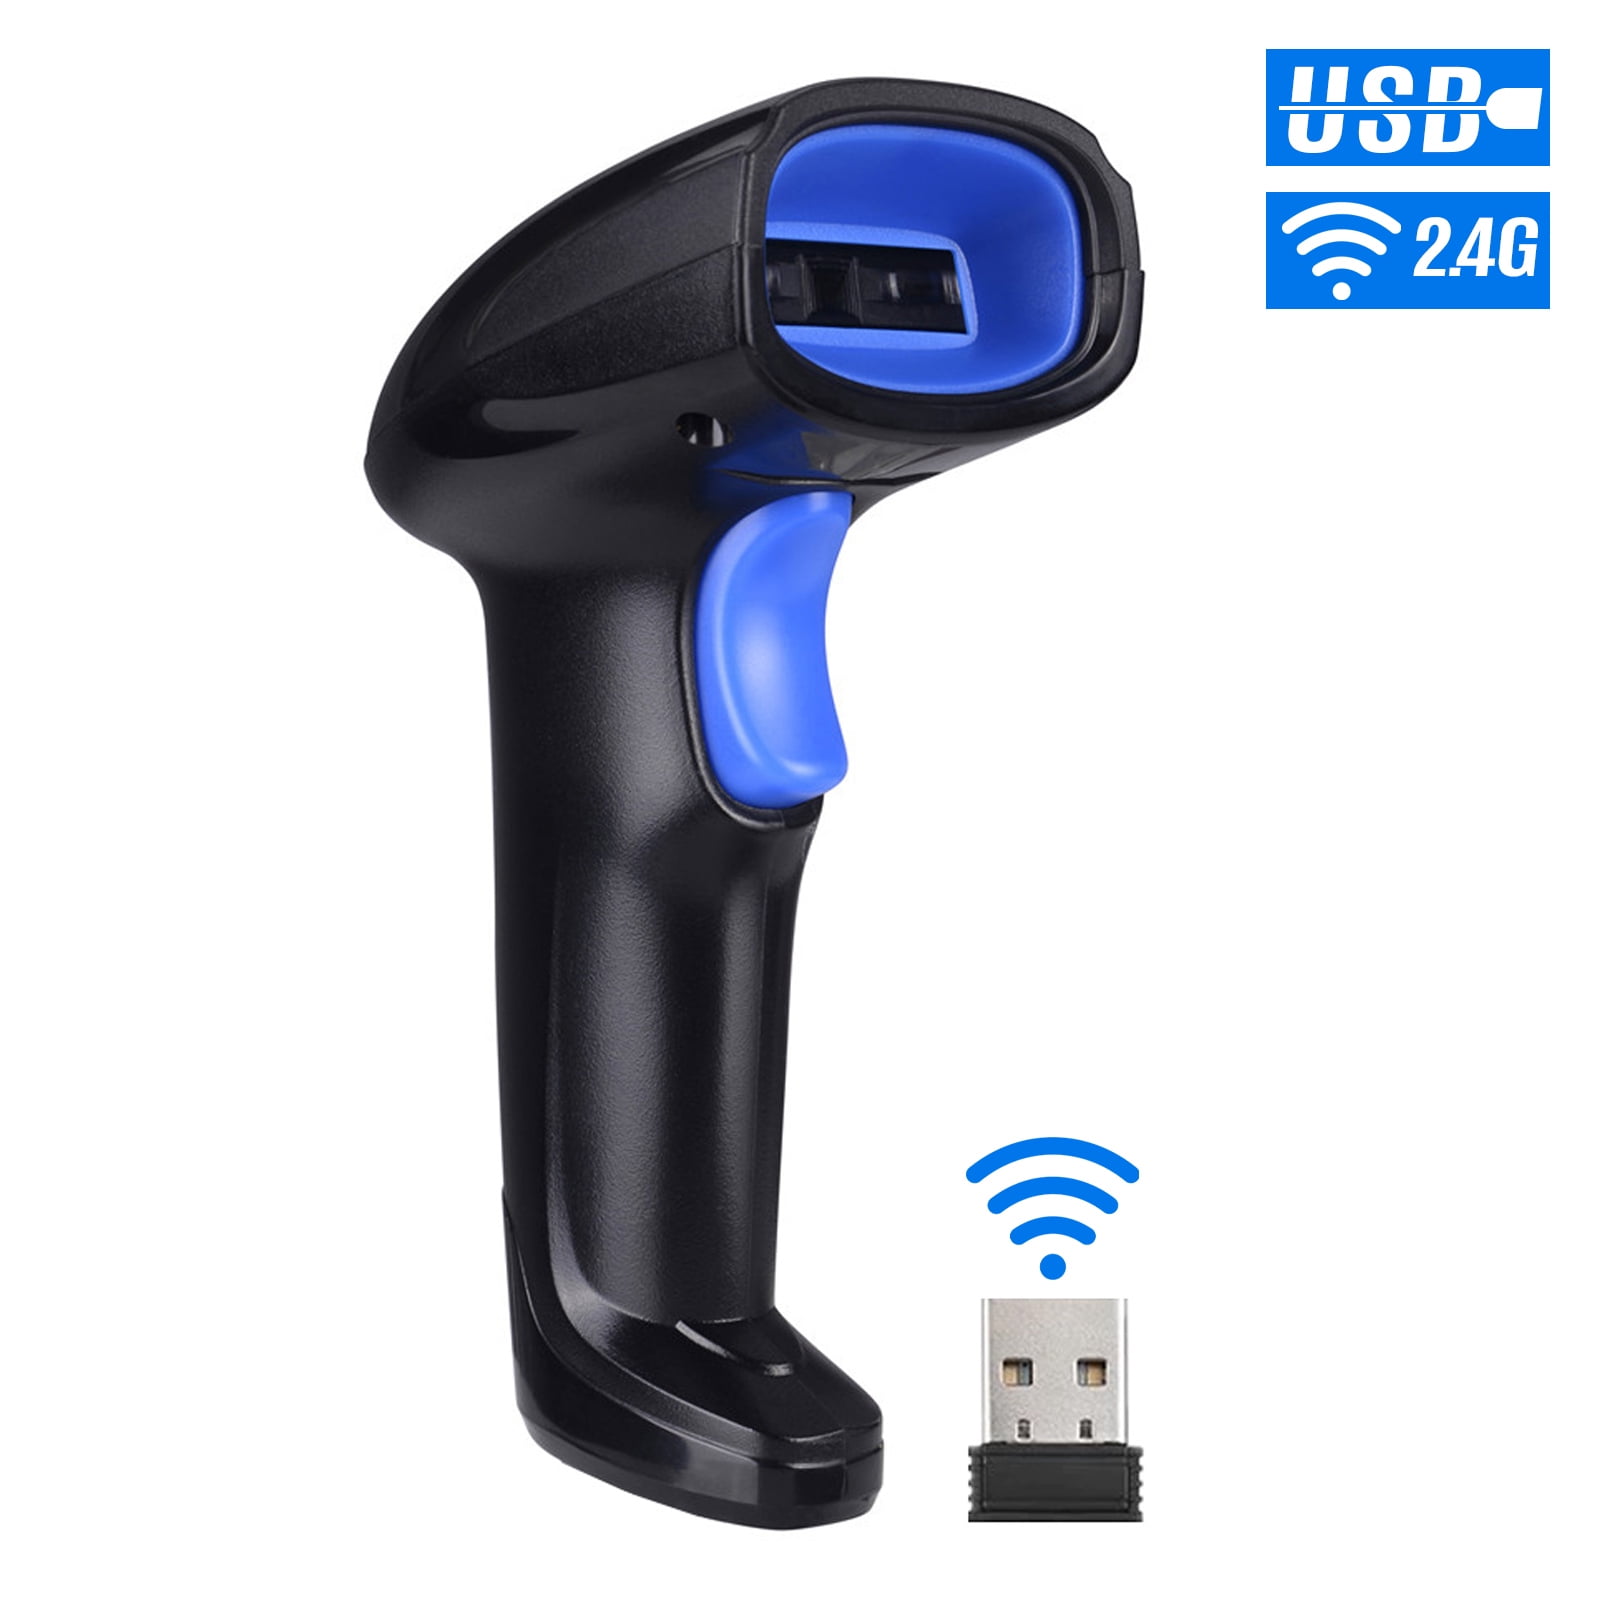 BAOSHARE Wireless Barcode Scanner with USB Cradle Receiver Charging Base WX-B-2D 1Pack 433MHz Handheld 1D/2D/QR Cordless Barcode Reader UP to 1000Ft Transmission Range